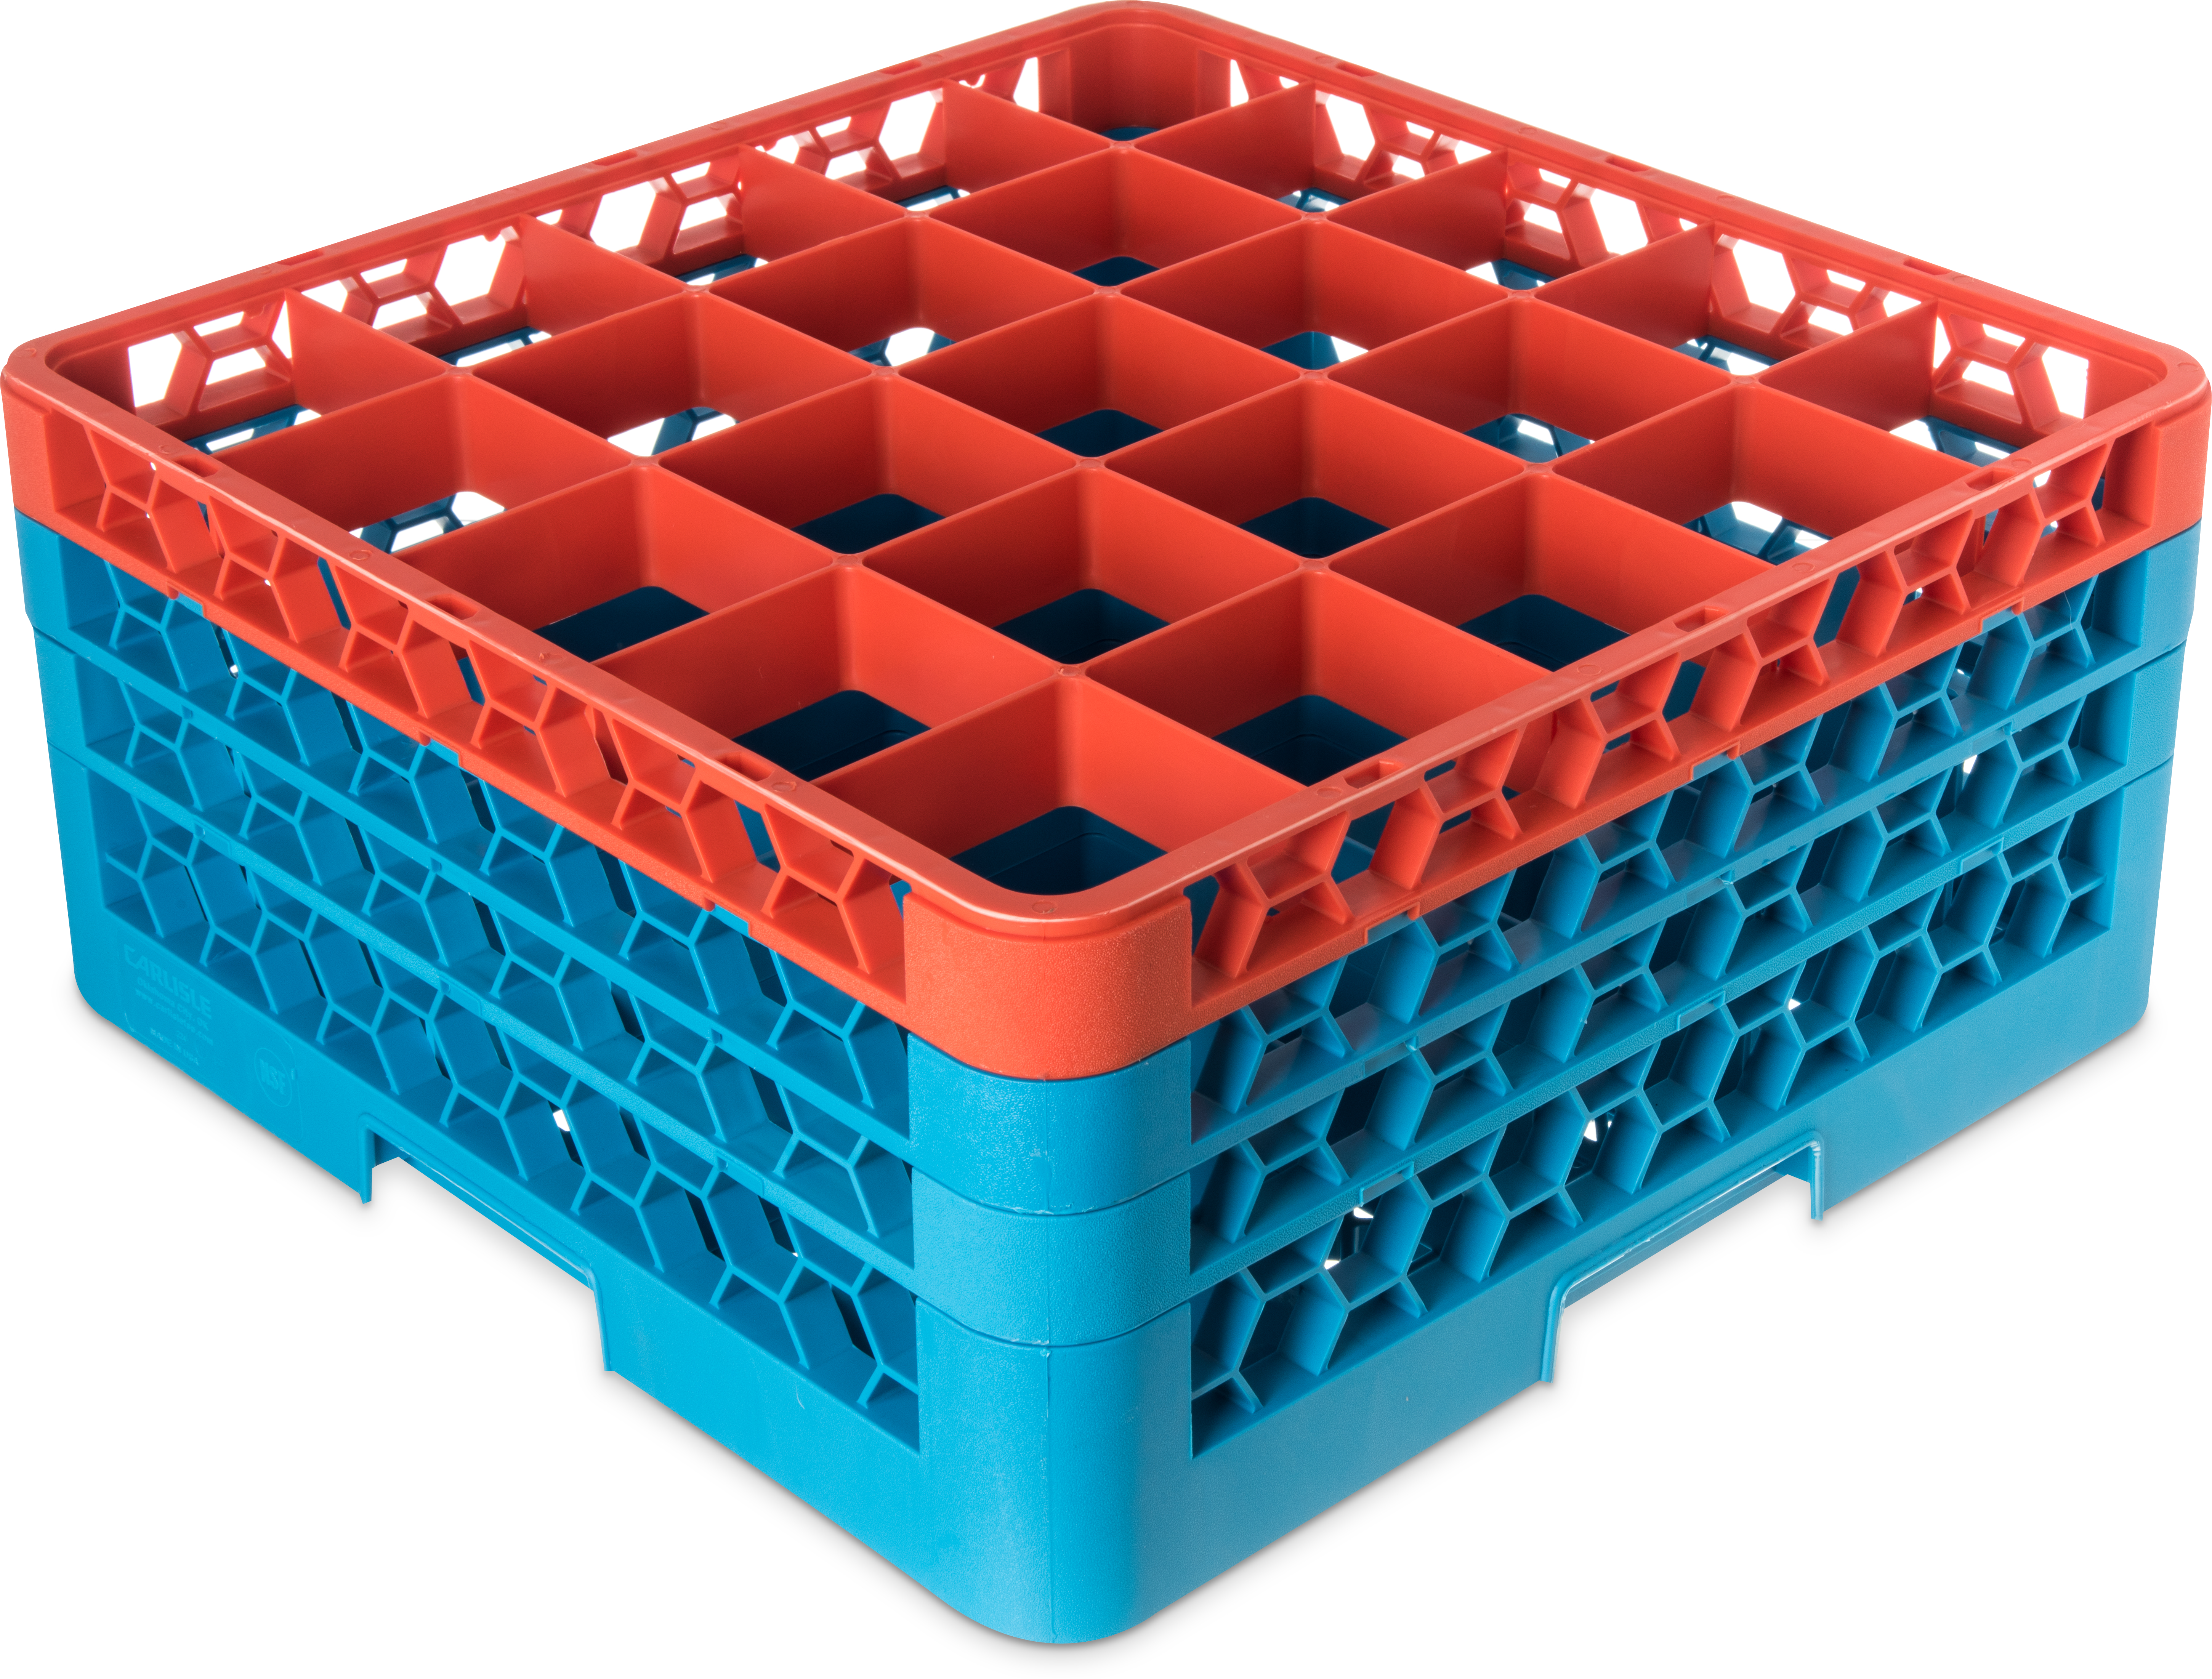 OptiClean 25 Compartment Glass Rack with 3 Extenders 8.72 - Orange-Carlisle Blue